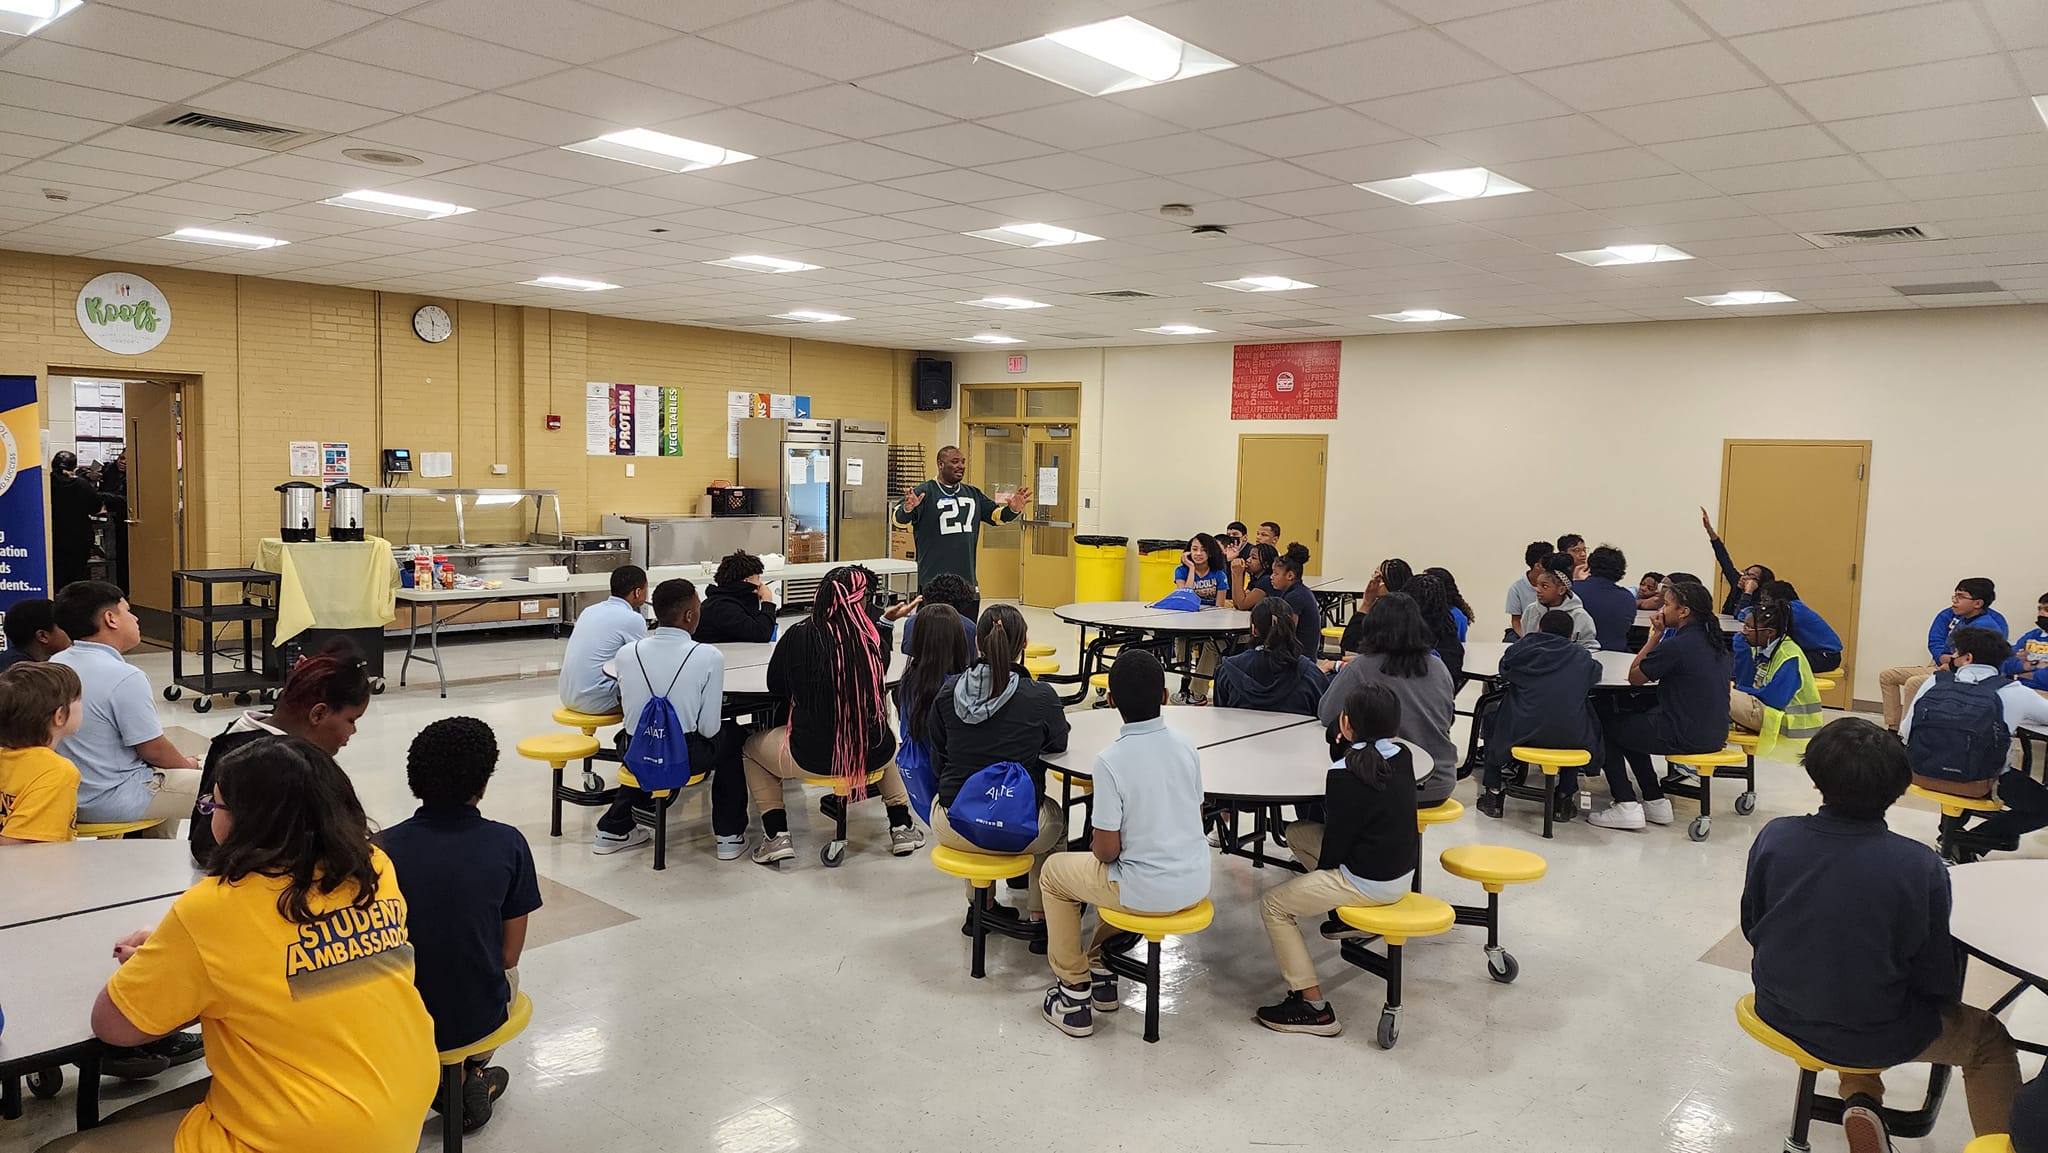 staff in cafeteria speaking to students